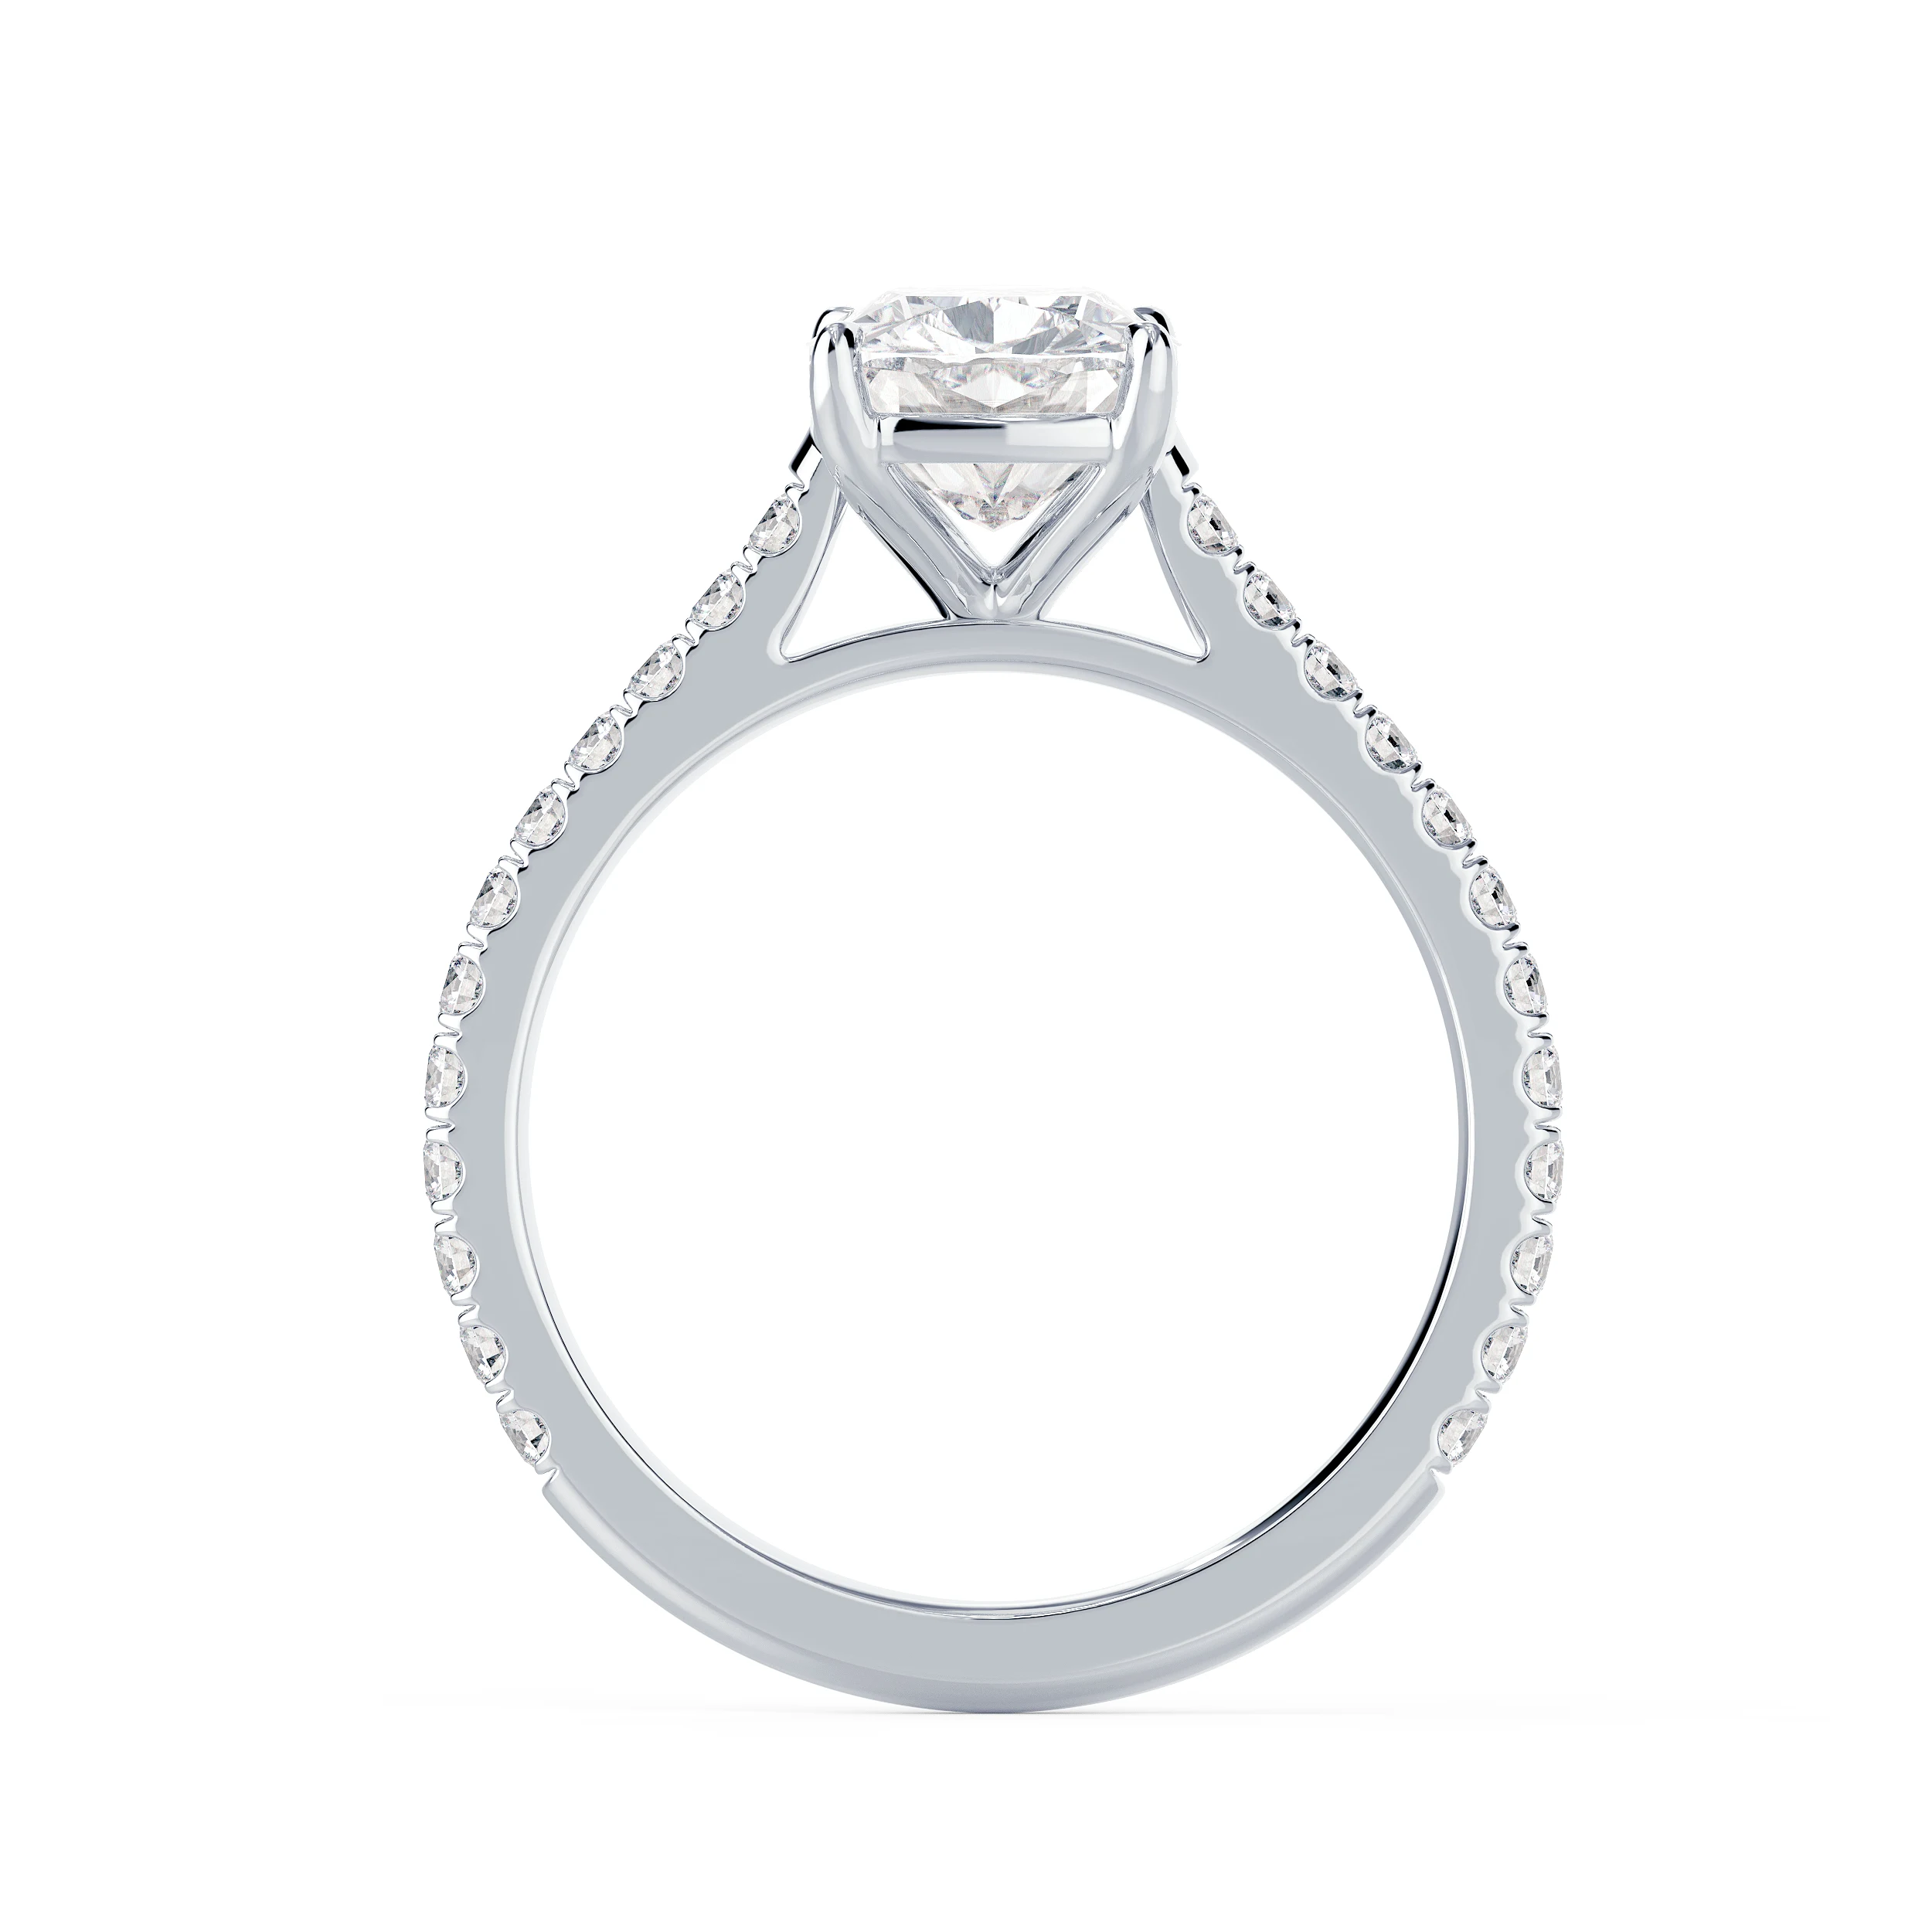 Exceptional Quality Lab Grown Diamonds set in White Gold Cushion Cathedral Pavé Diamond Engagement Ring (Profile View)